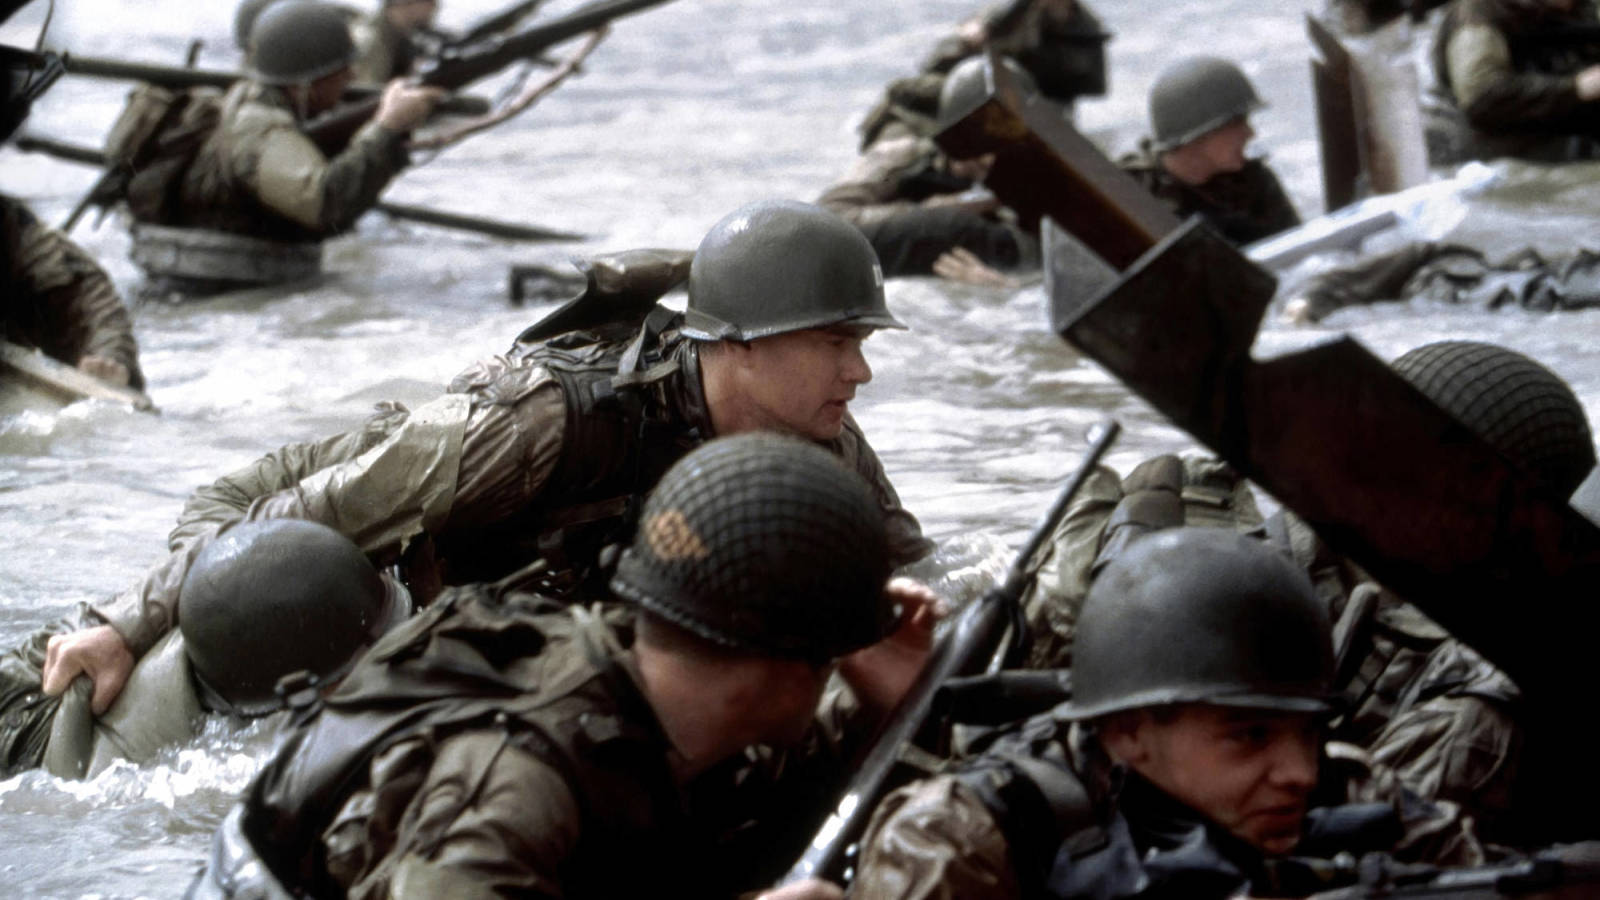 save private ryan full movie free download